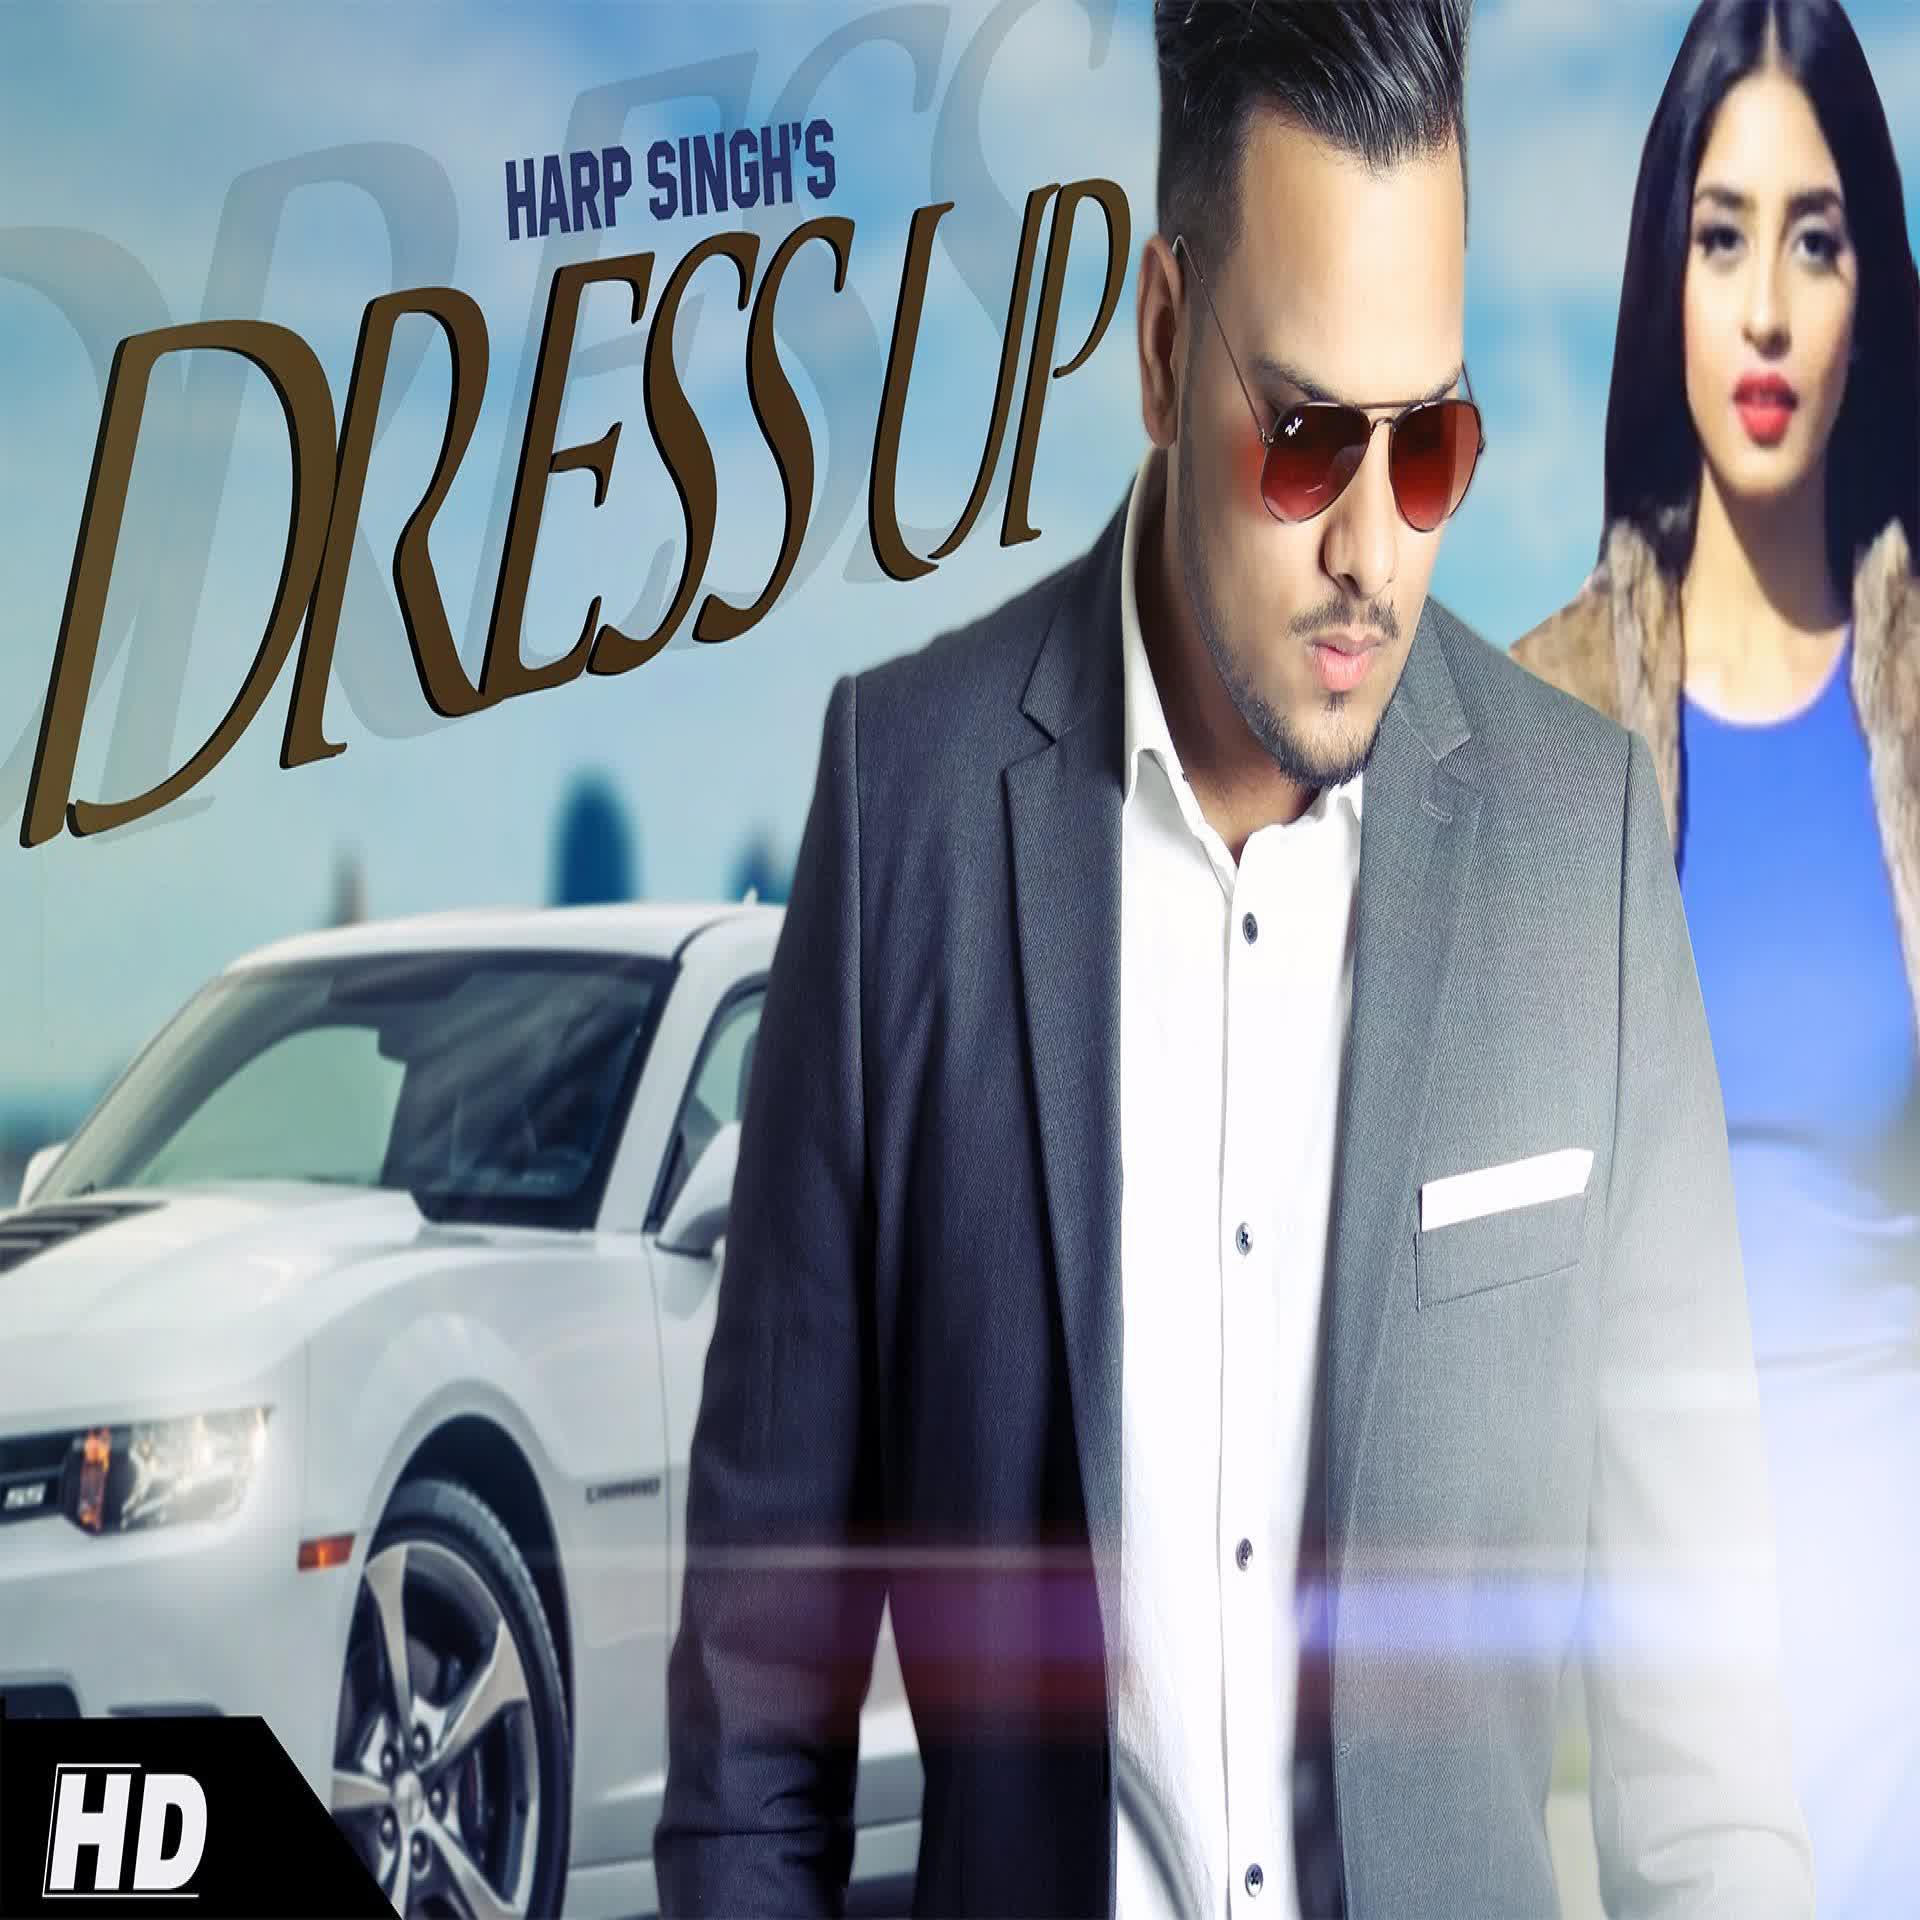 Dress Up Harp Singh  Mp3 song download